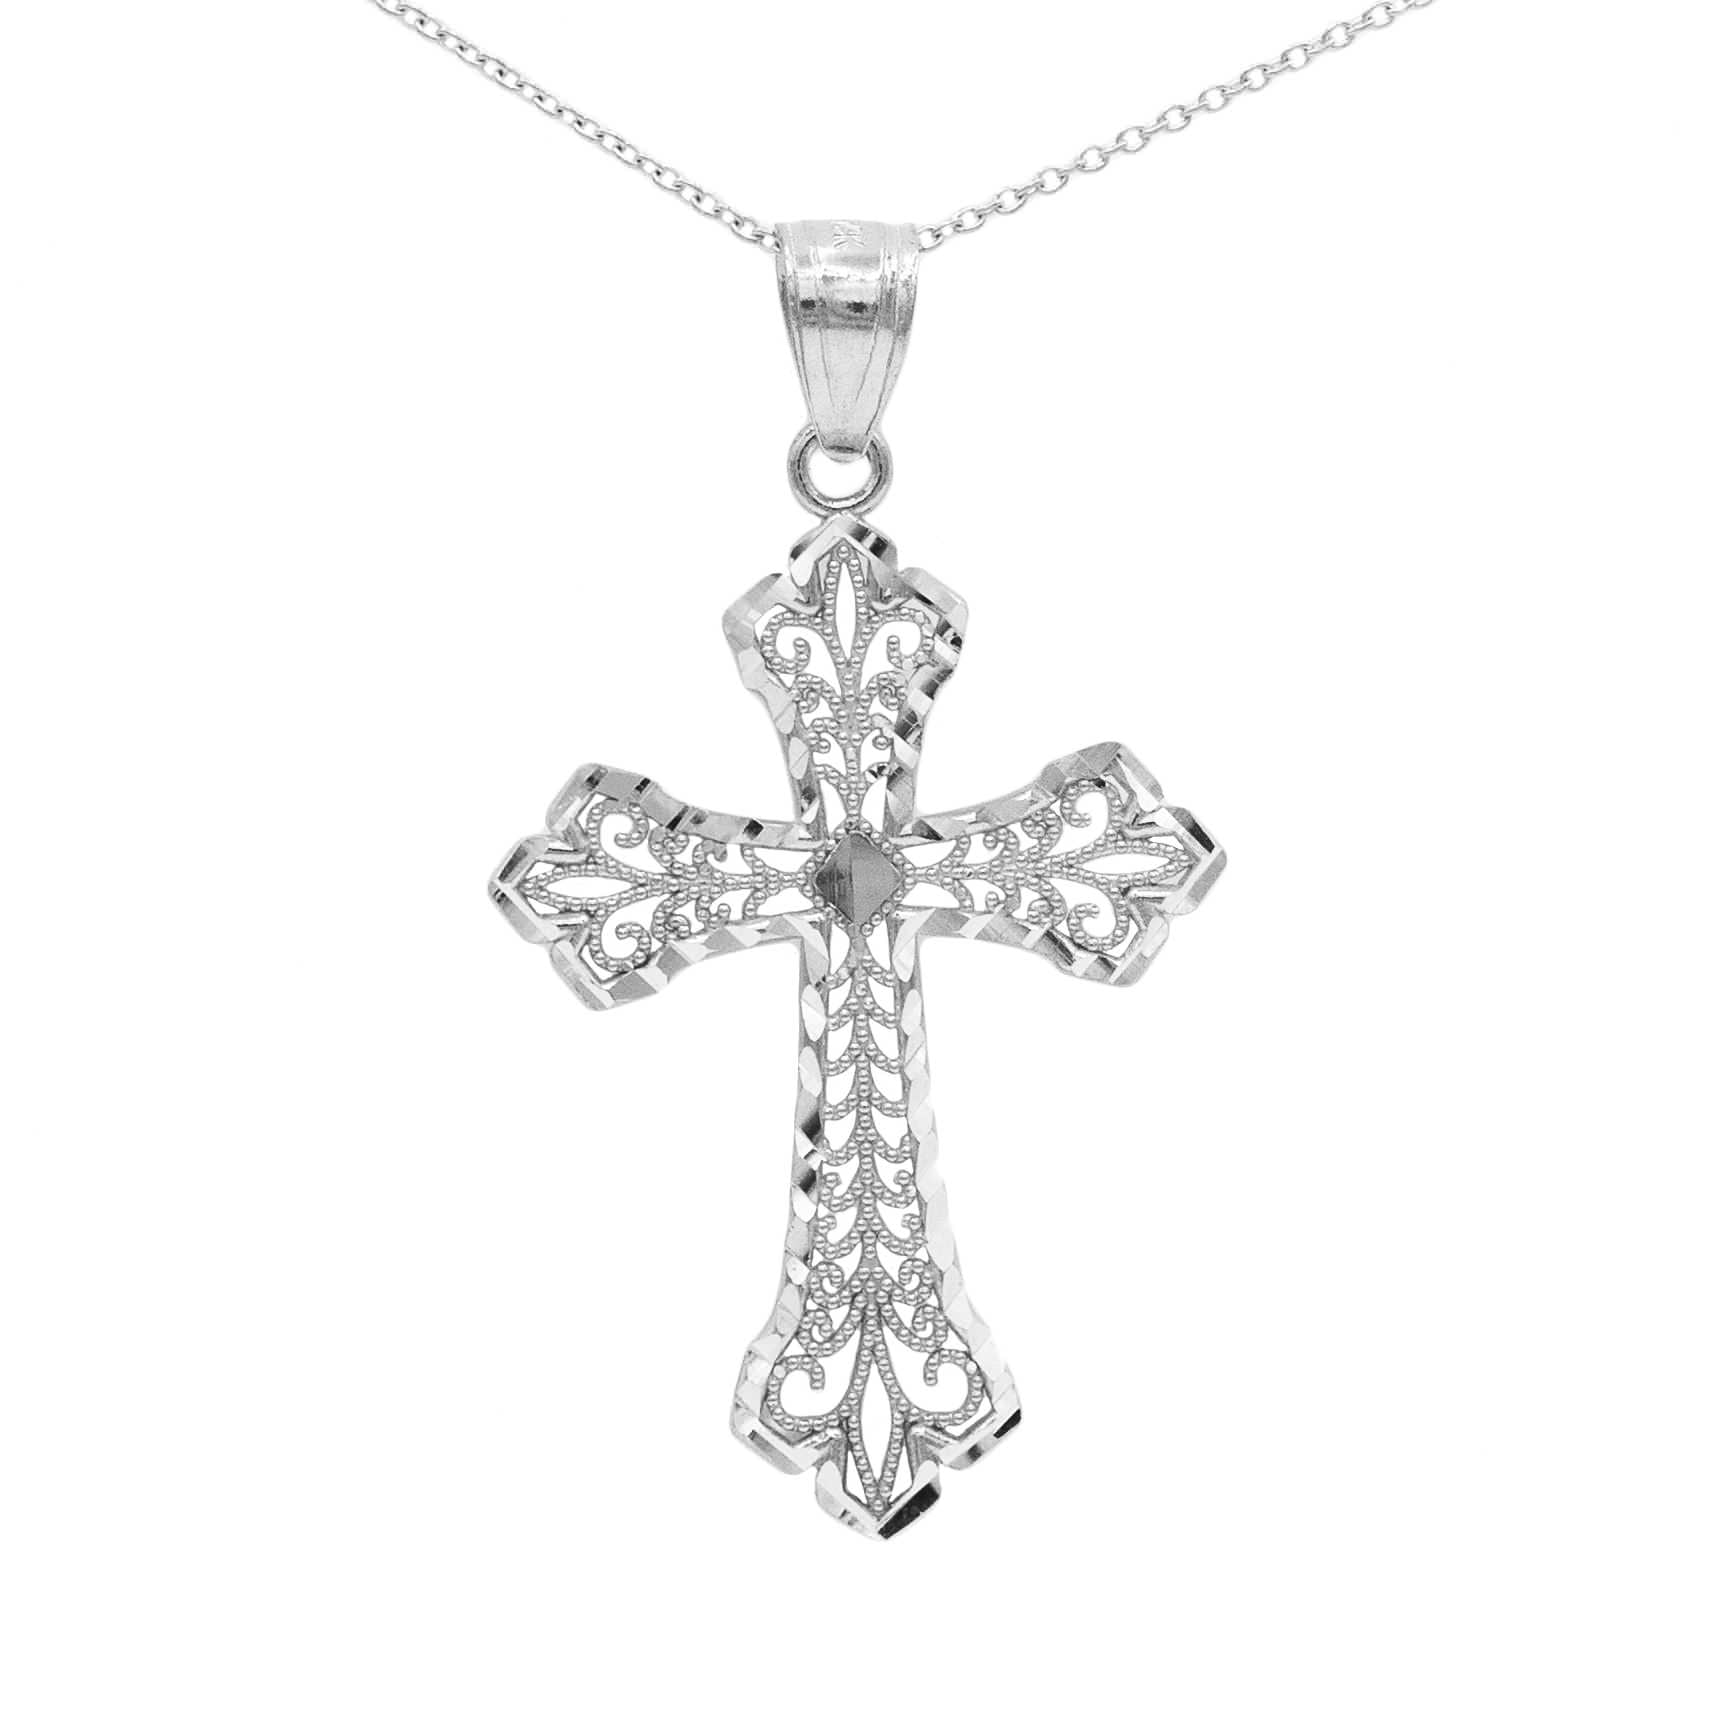 30 Day Money B... .925 Sterling Silver Crucifix Pendant For Women On 18" Chain 